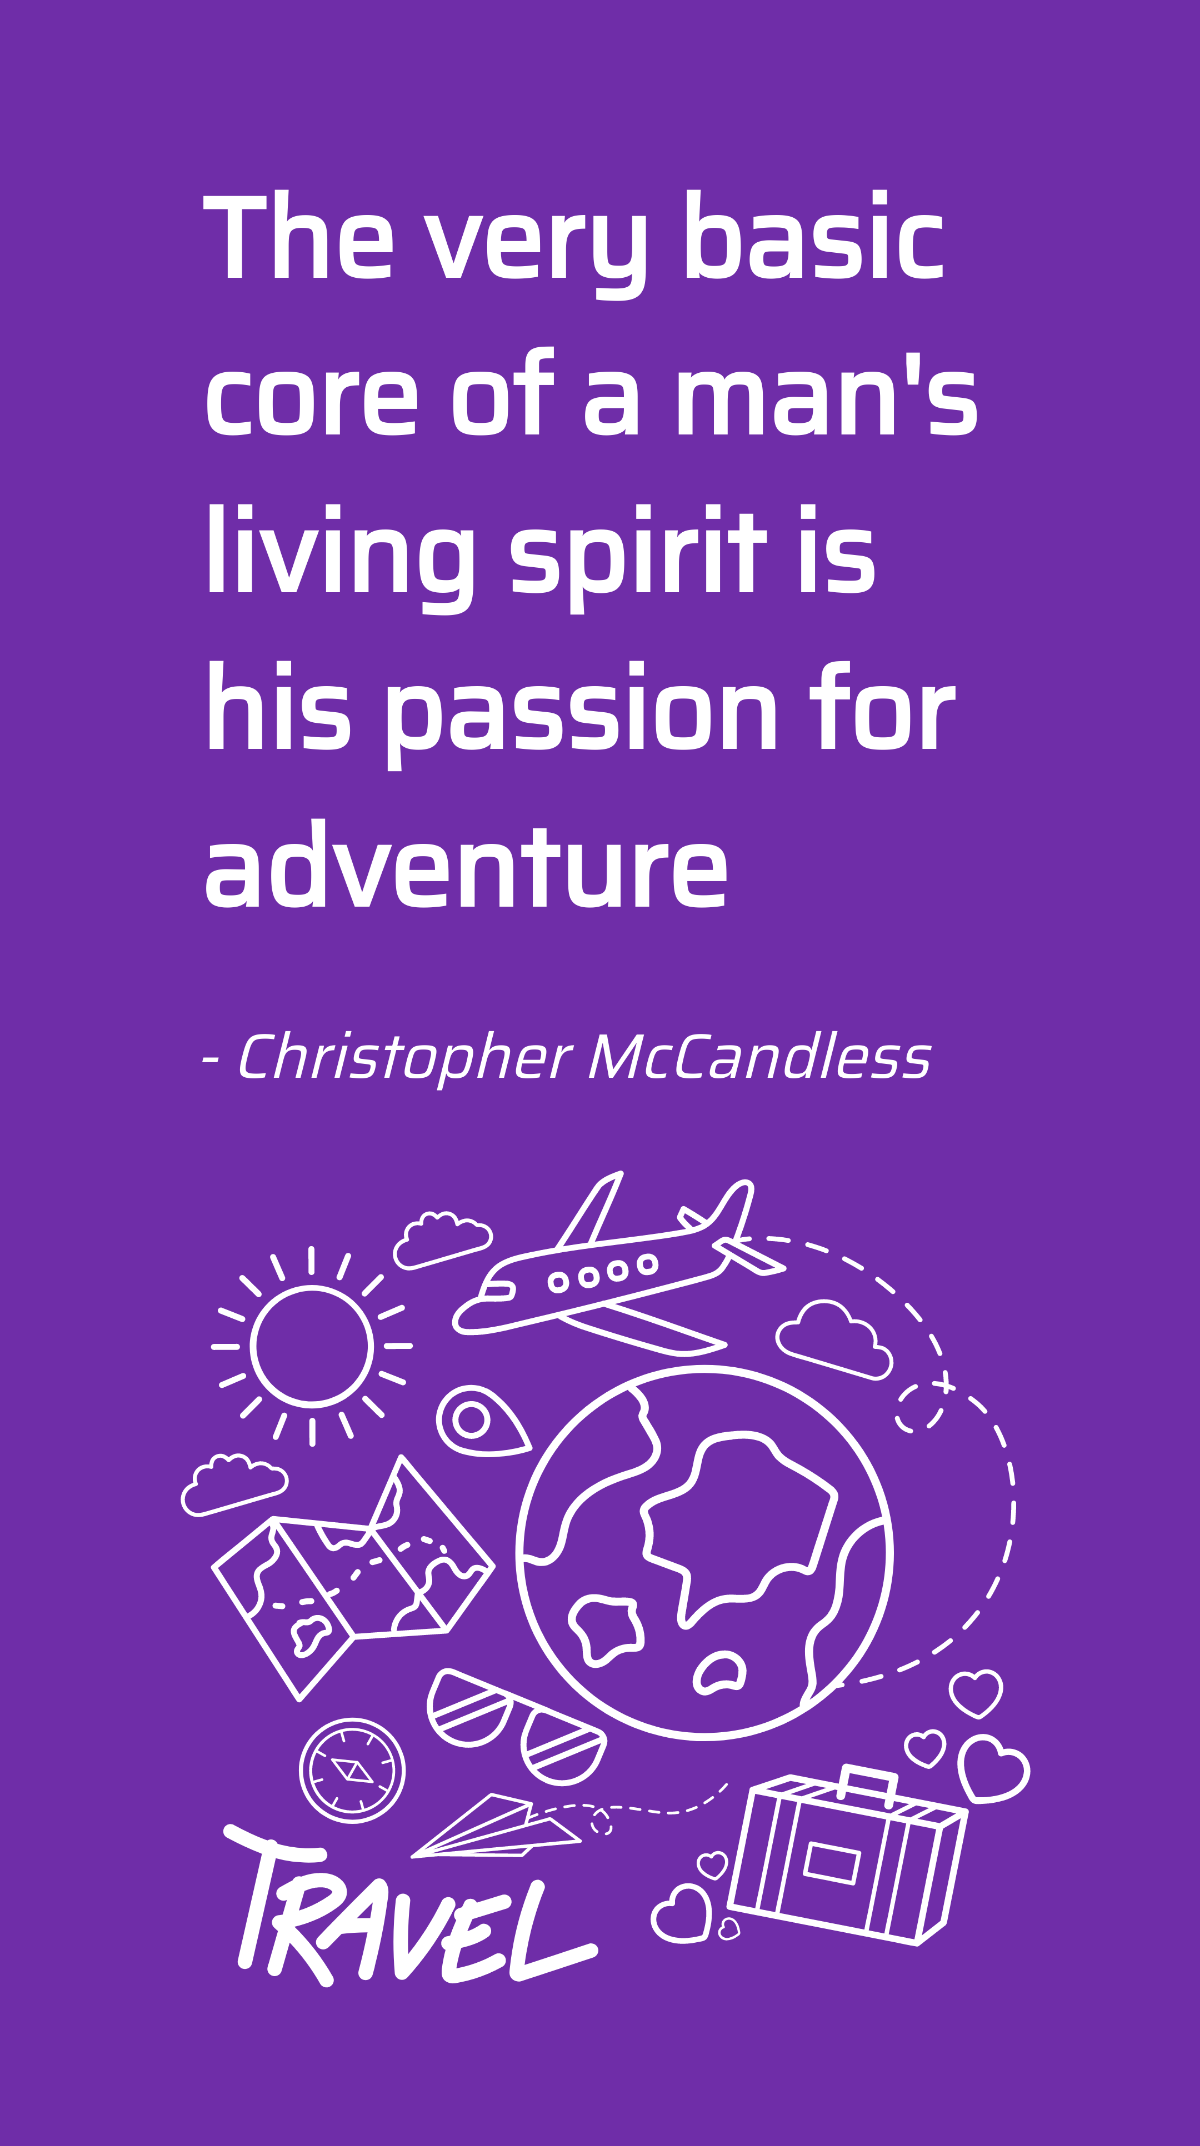 Christopher McCandless - The very basic core of a man's living spirit is his passion for adventure Template